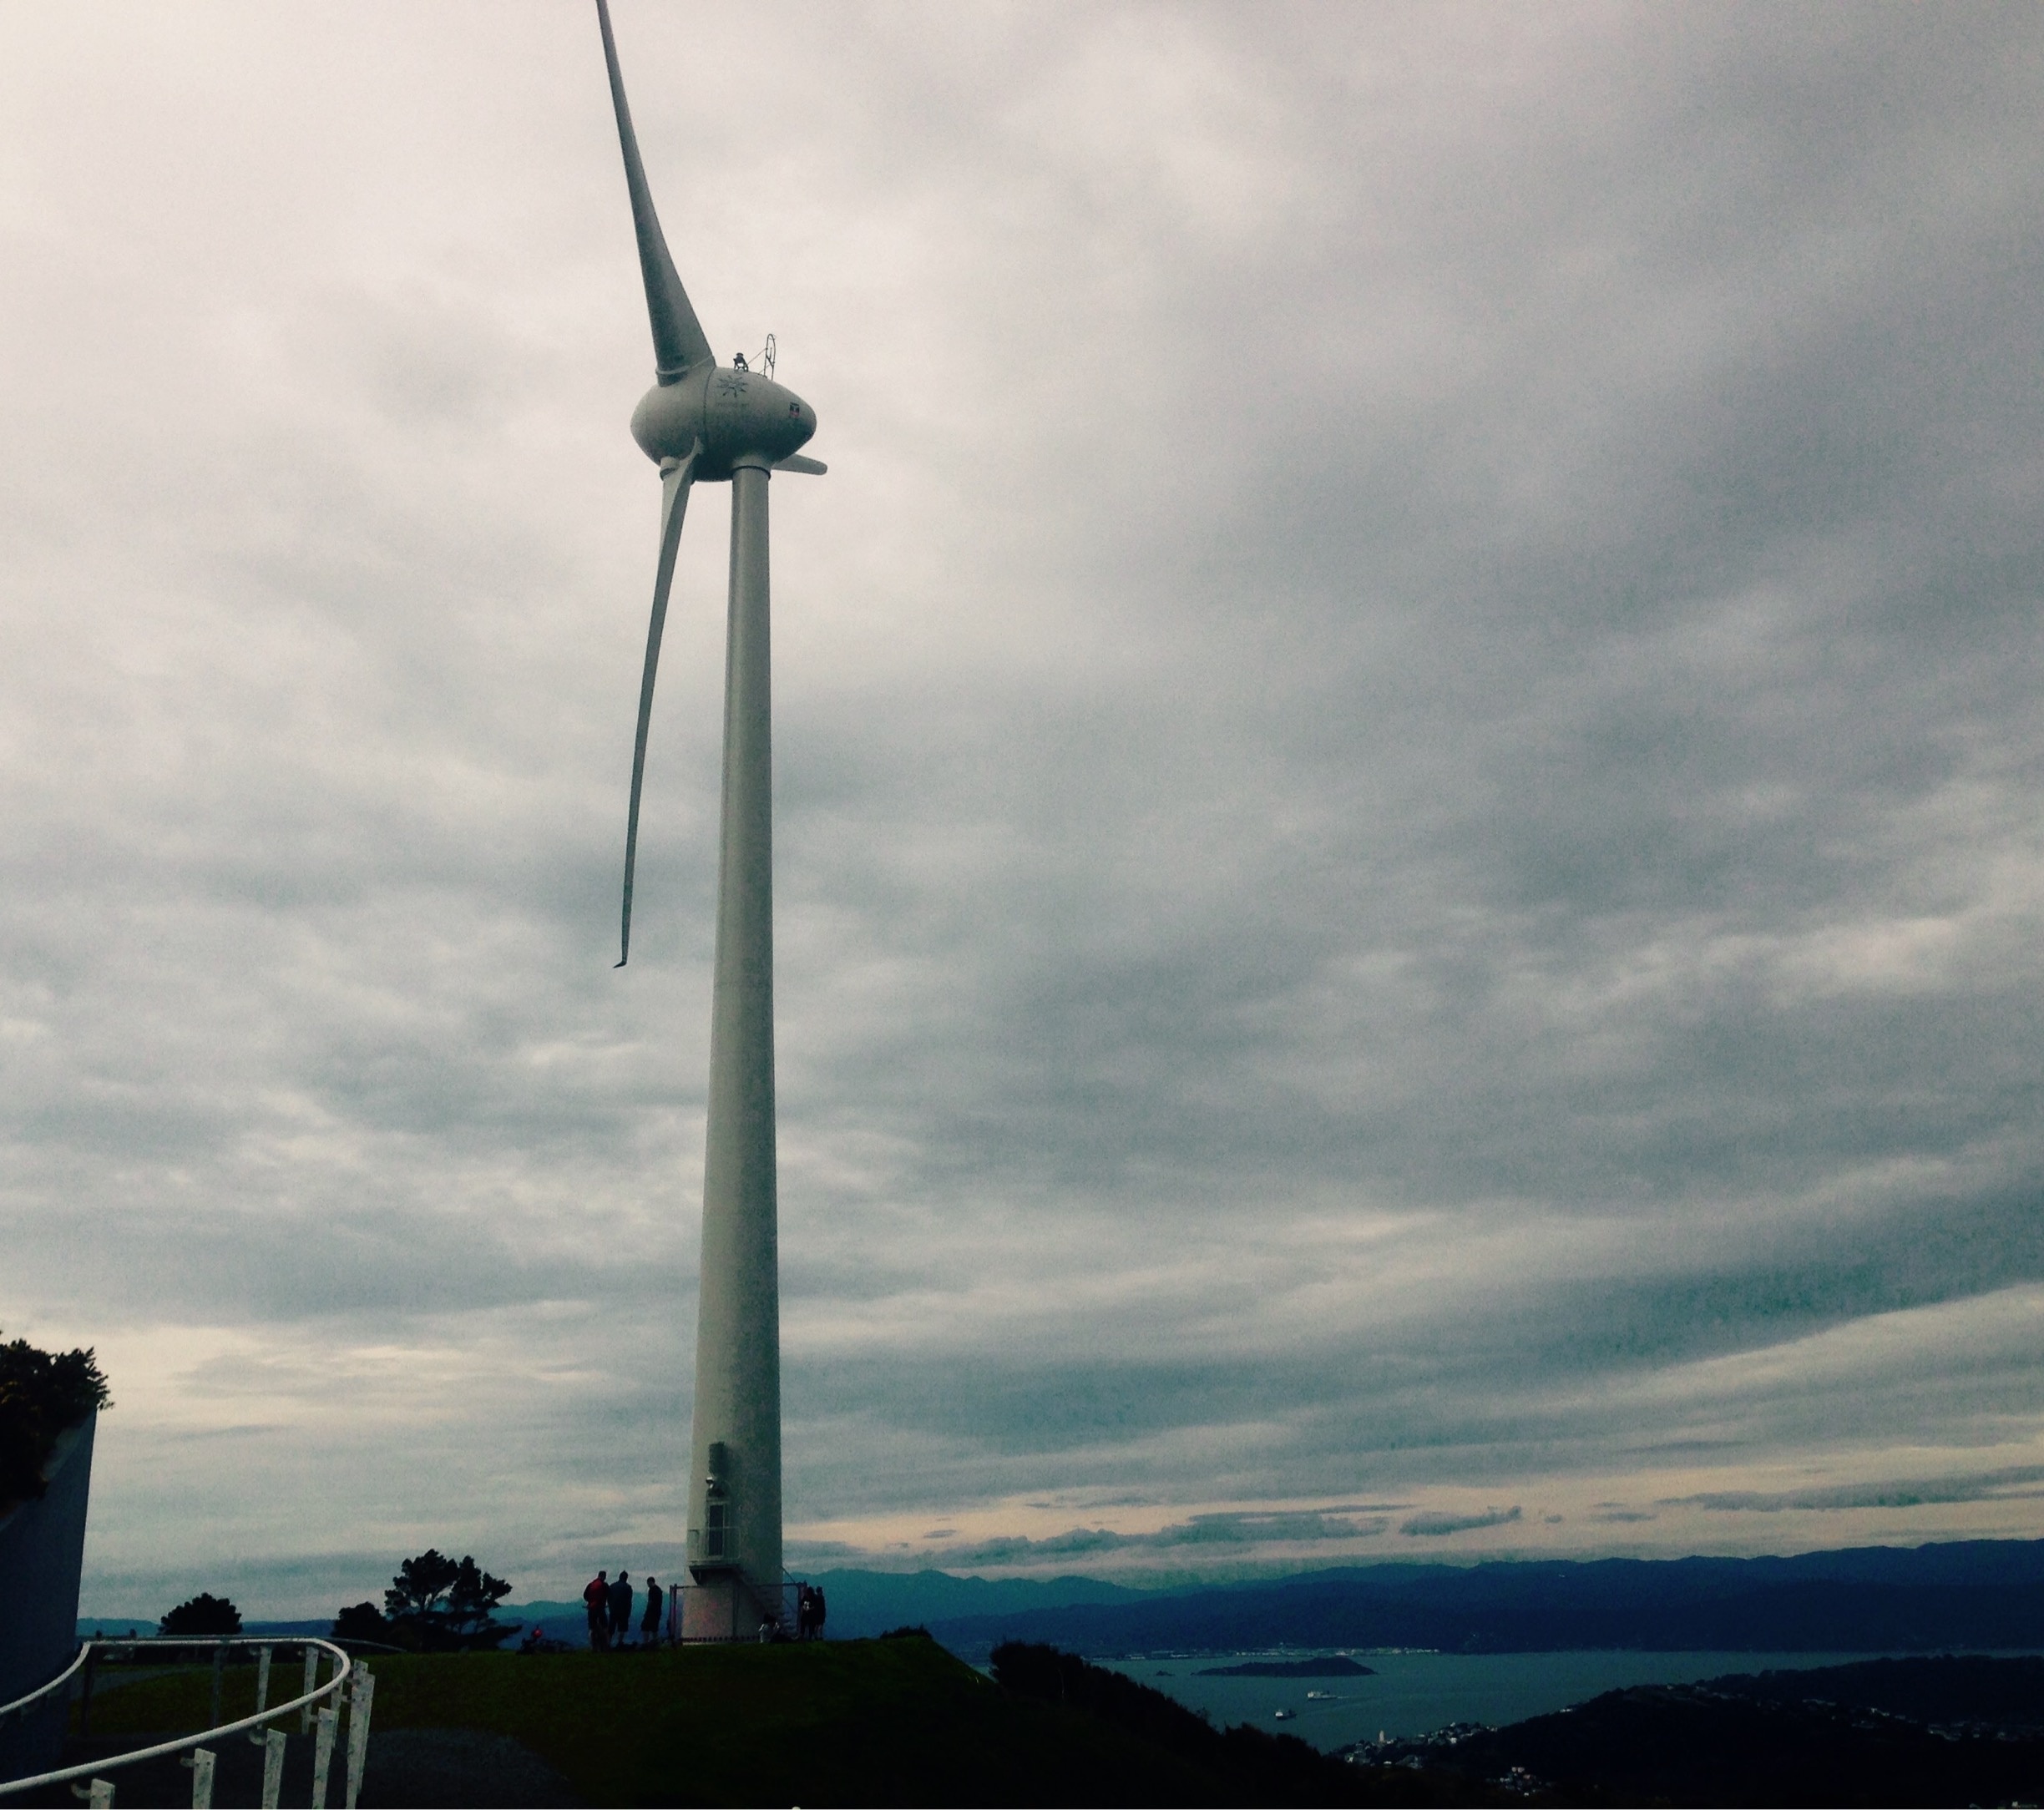 #Brooklyn Wind Turbine in Wellington. The view at the to is amazing😊😍